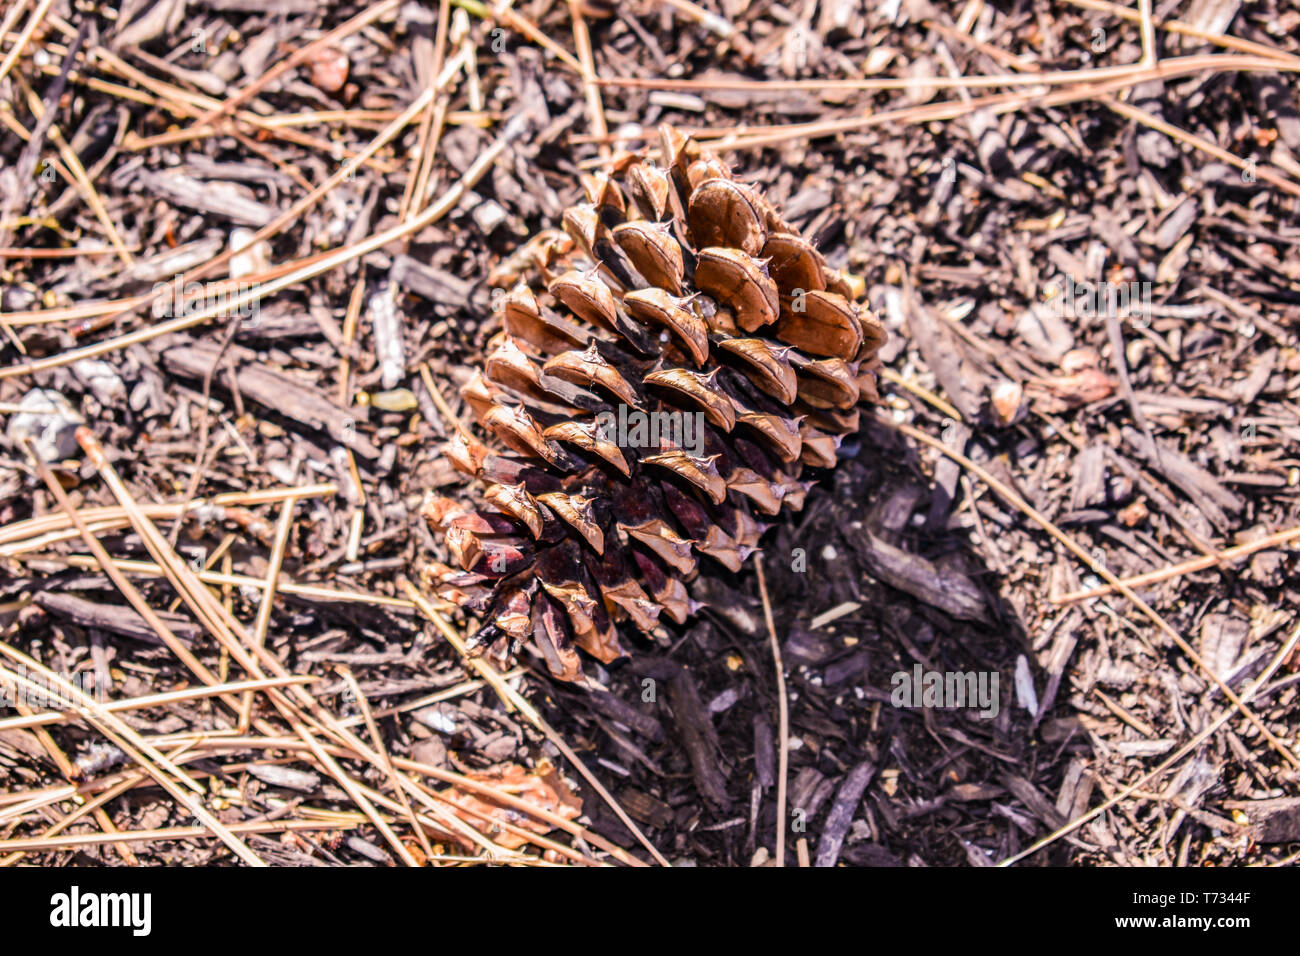 Closeup of Perfectly Shaped, Fallen Pine (Conifer) Seed Cone in a Bed of Needles Stock Photo